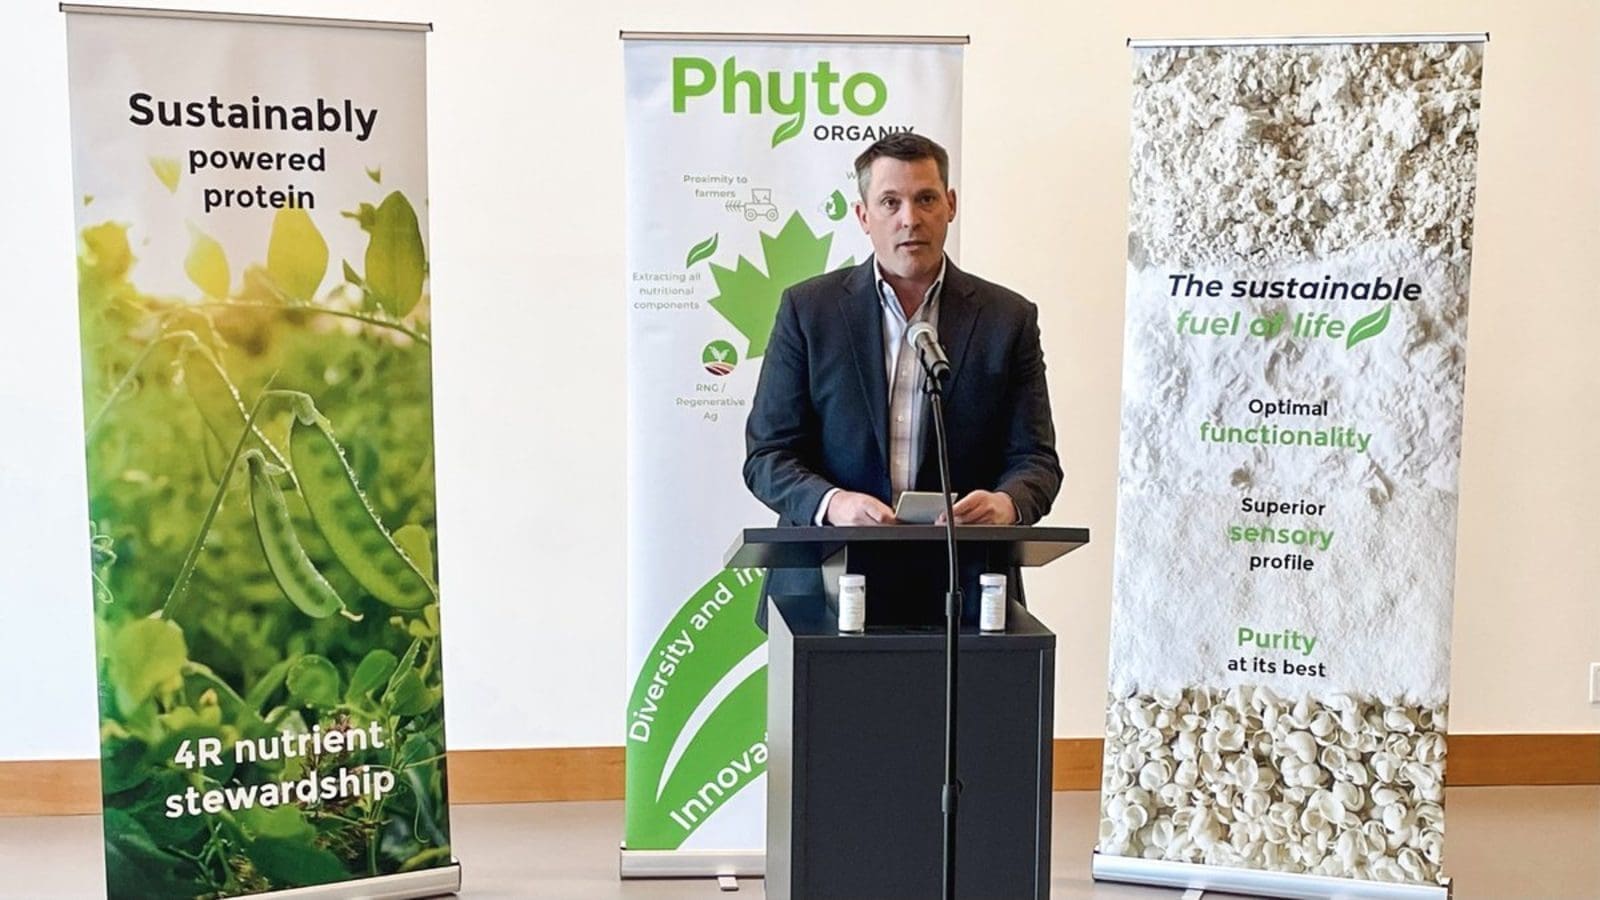 Phyto Organix Foods to build a net-zero-emission plant protein processing facility in Alberta